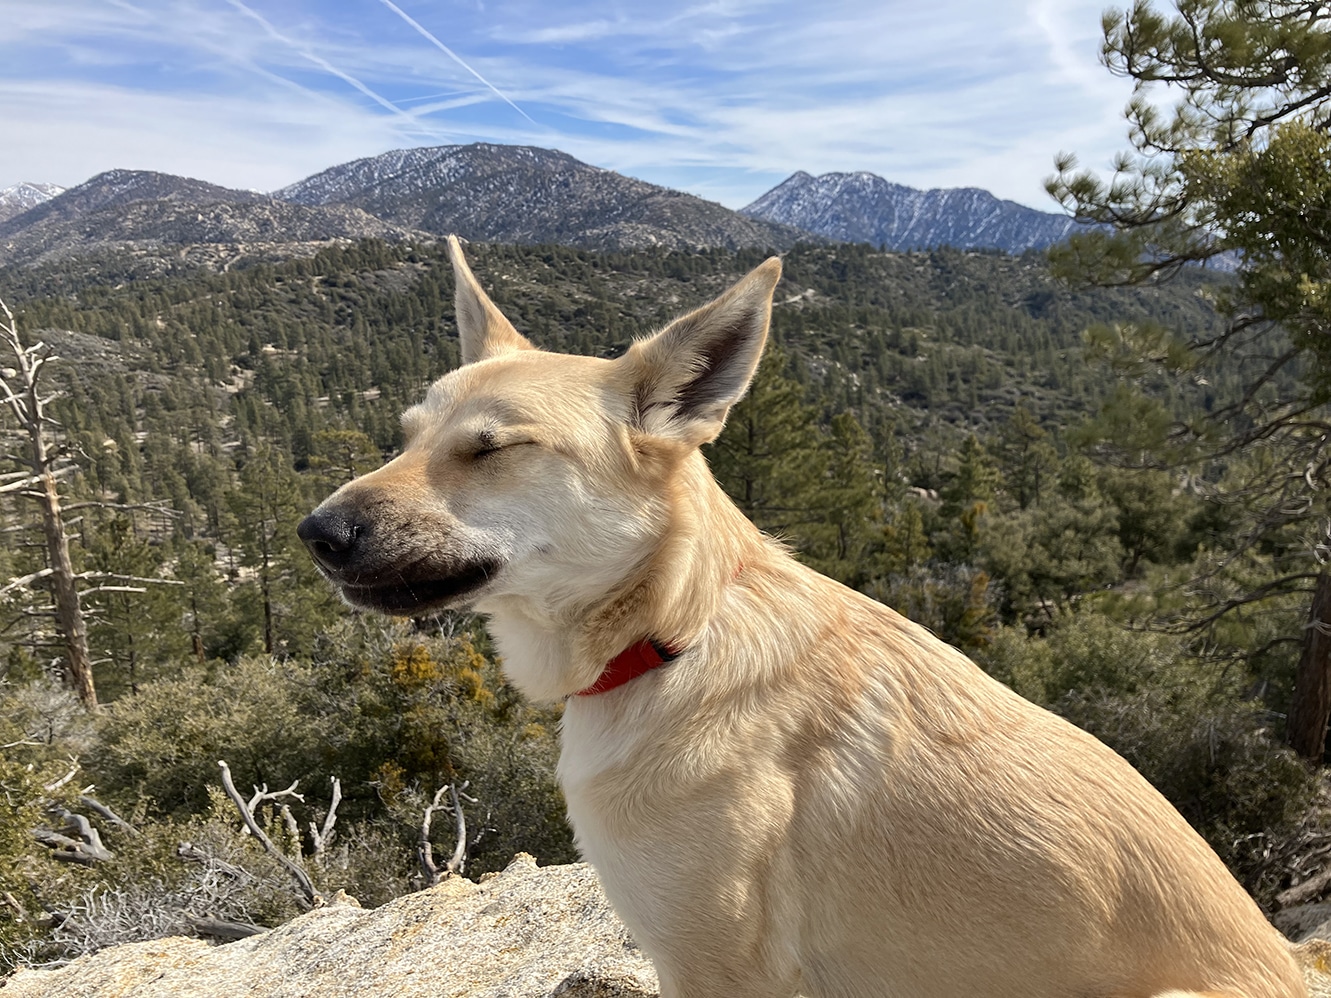 A picture of a dog on a rock in Angeles National Forest.